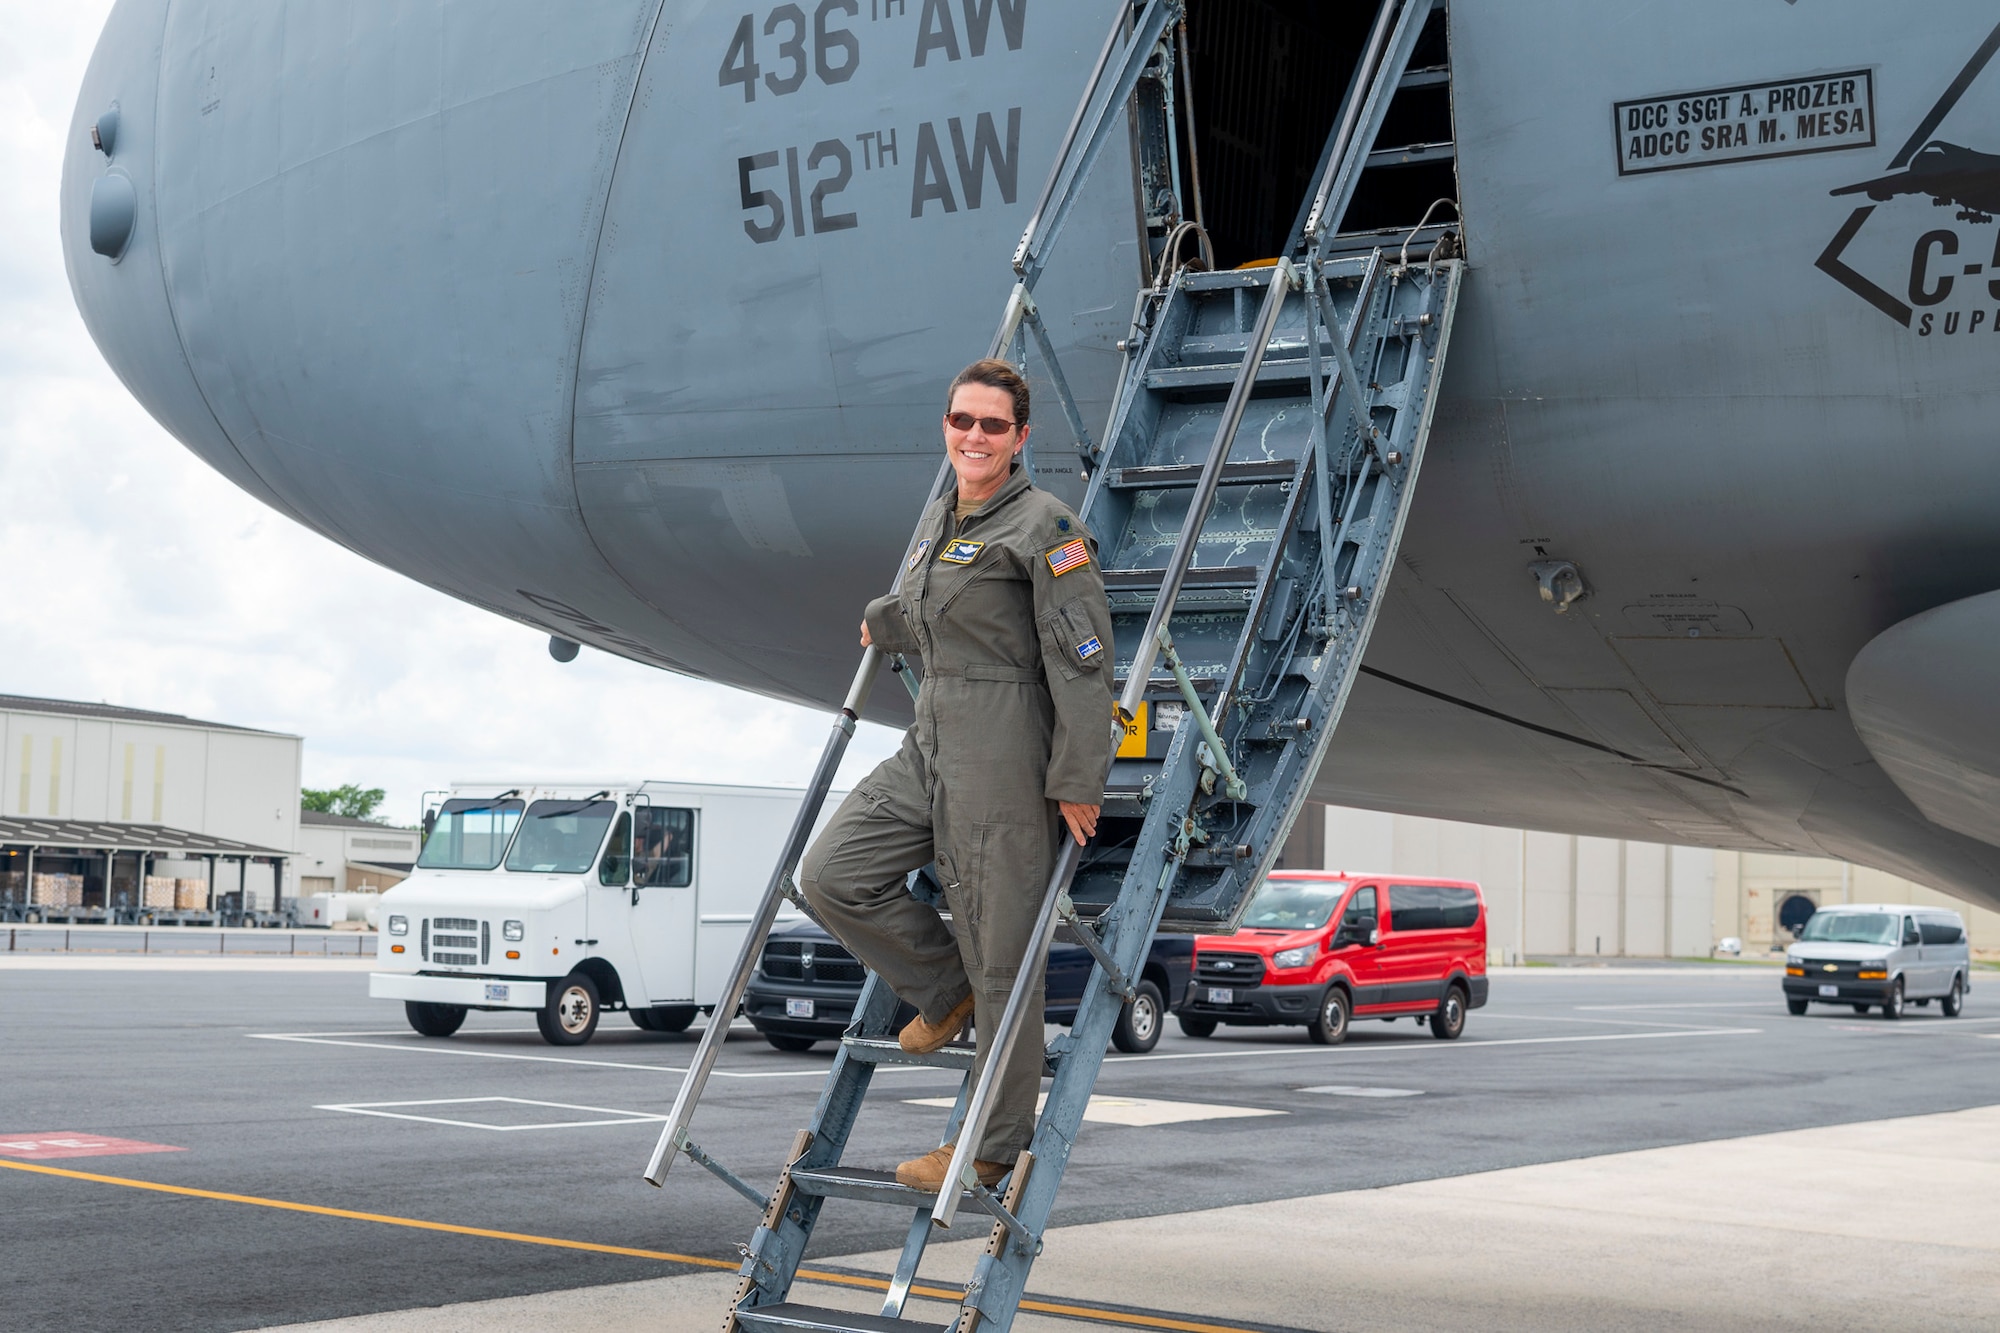 U.S. Air Force Lt. Col. Anita West-Werner, 512th Operations Group, Dover Air Force Base, Delaware, poses for a photo on the steps of a C-5M Super Galaxy June 7, 2022. West-Werner flew her final flight after 26 years with the 512th AW. West-Werner's next assignment is at the Pentagon in Arlington, Virginia, where she'll be the Individual Mobilization Augmentee to the Director of the Air Force Crisis Action Team. (U.S. Air Force photo by Mauricio Campino)